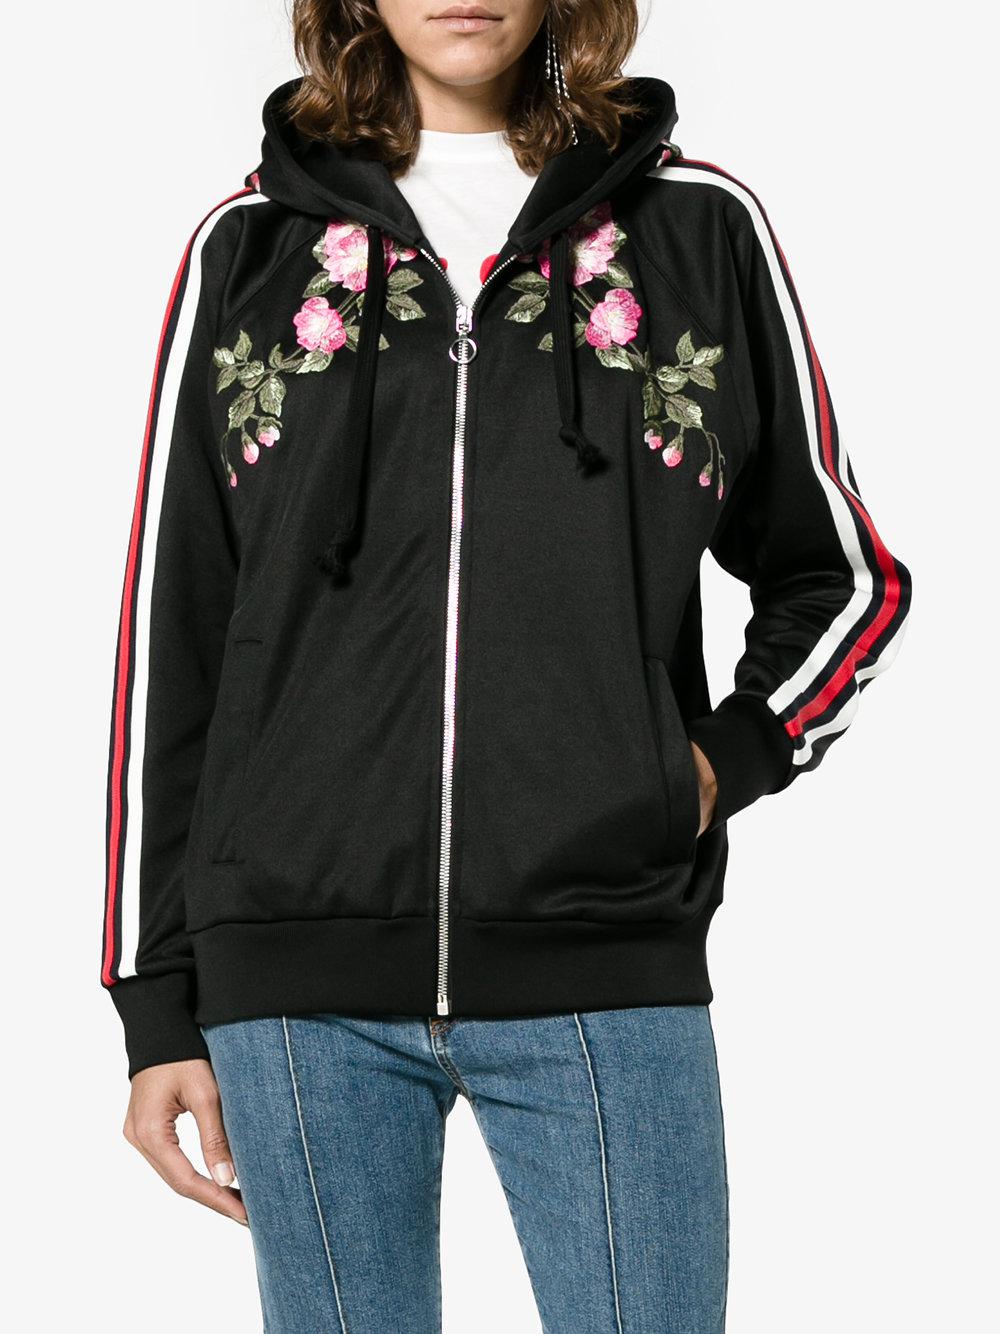 Gucci Embroidered Zip-up Hoodie in Black | Lyst